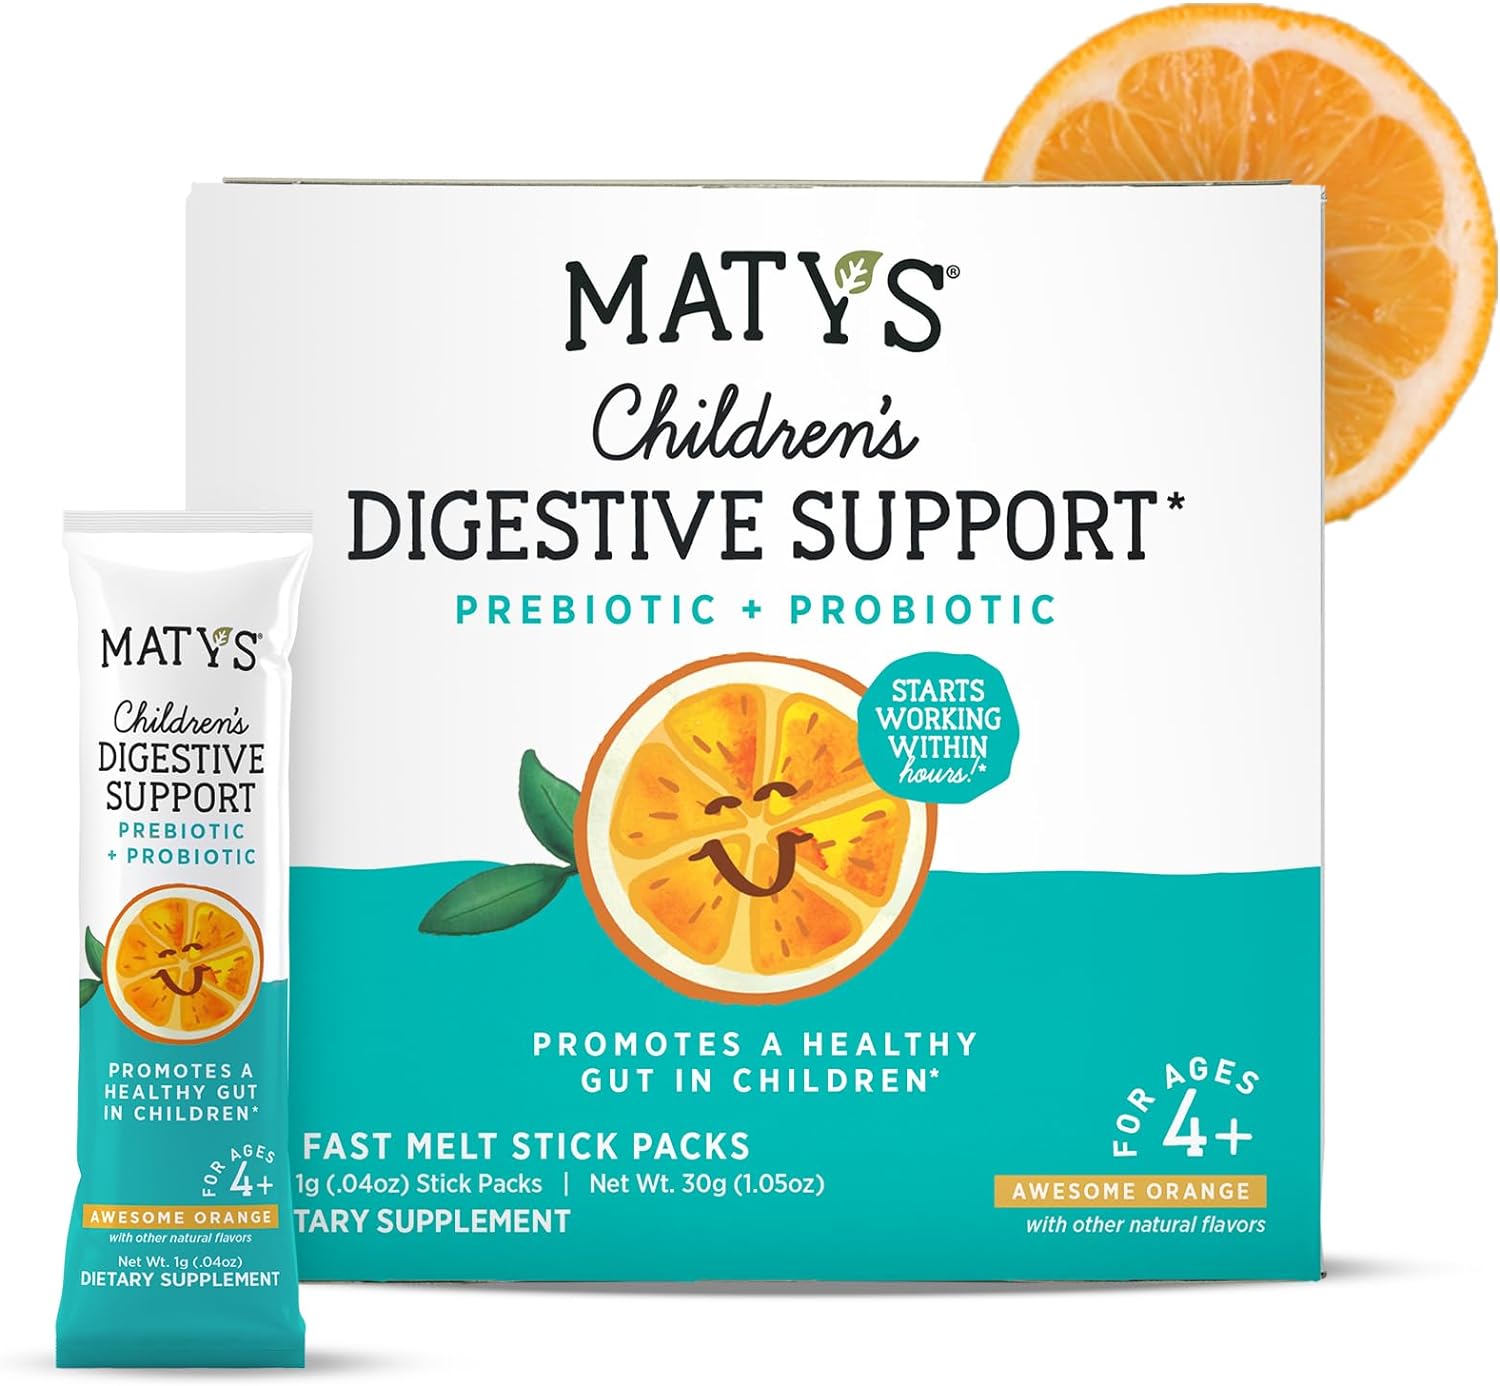 Matys Kids Digestive Support, Probiotic + Prebiotic Powder Packs for Childrens Digestive Health, Ages 4 Years +, Awesome Orange Flavor, Sugar Free, Gluten Free, Fast Melt, 30 Single Serve Packets